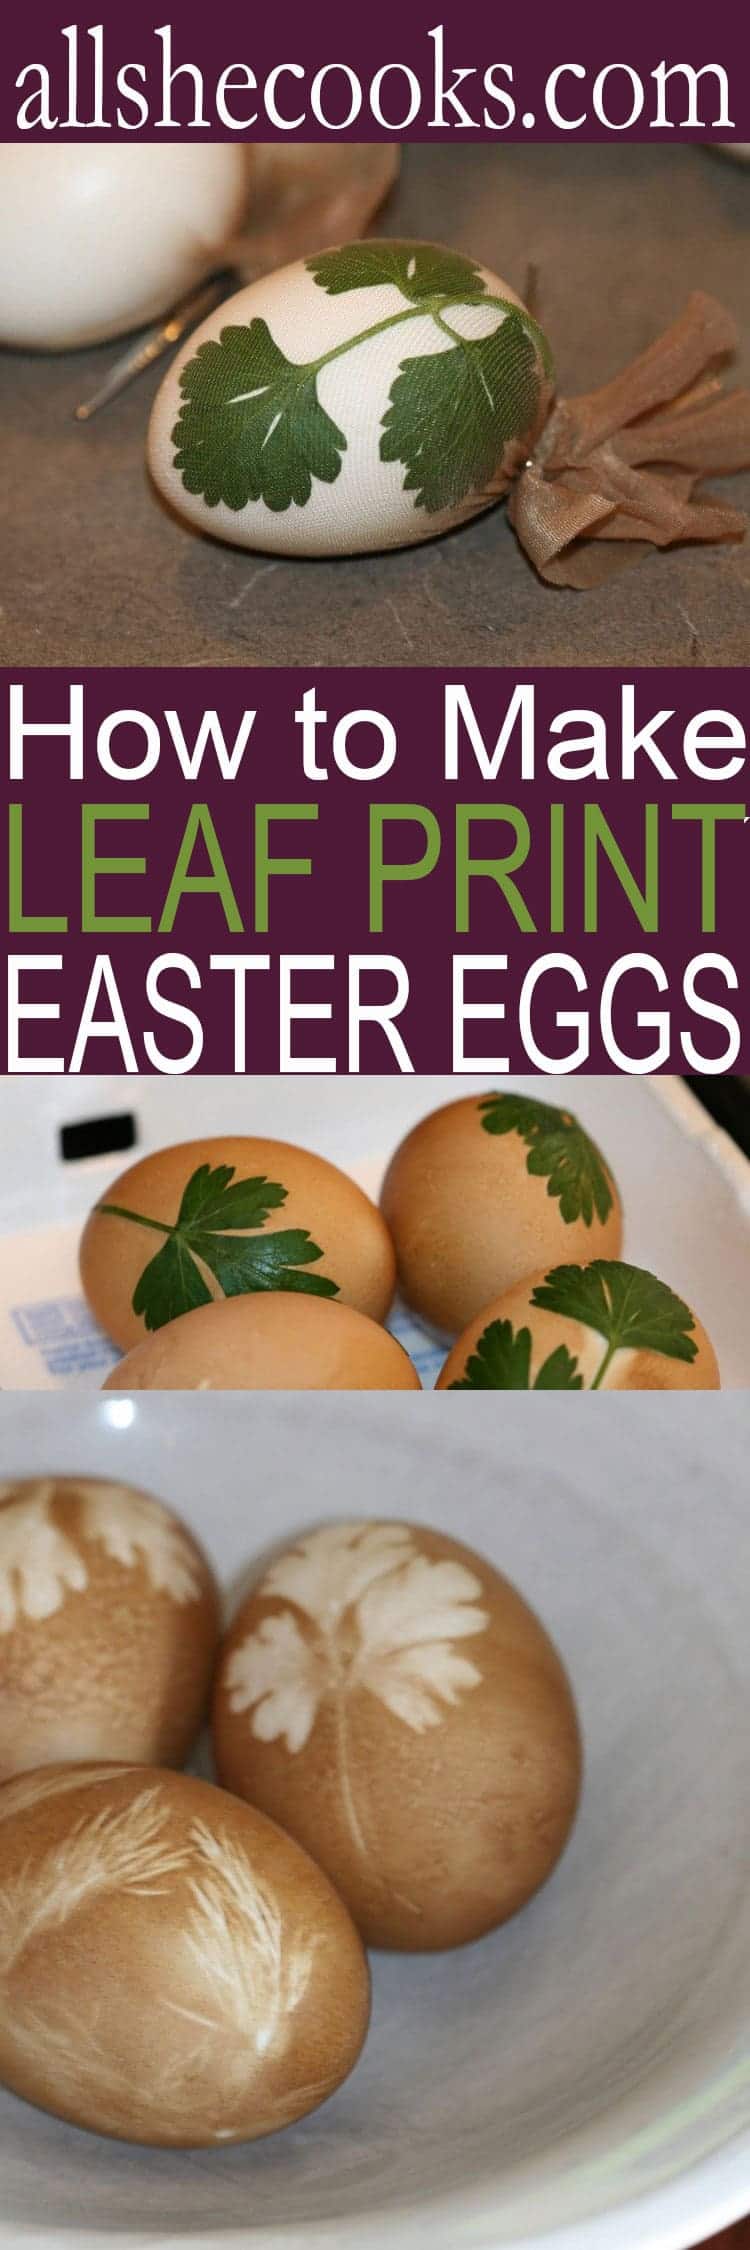 Learn how to make Leaf Print Easter Eggs just in time for Easter Decorating. You'll love how simple these are to make using leafs picked right from your own yard.